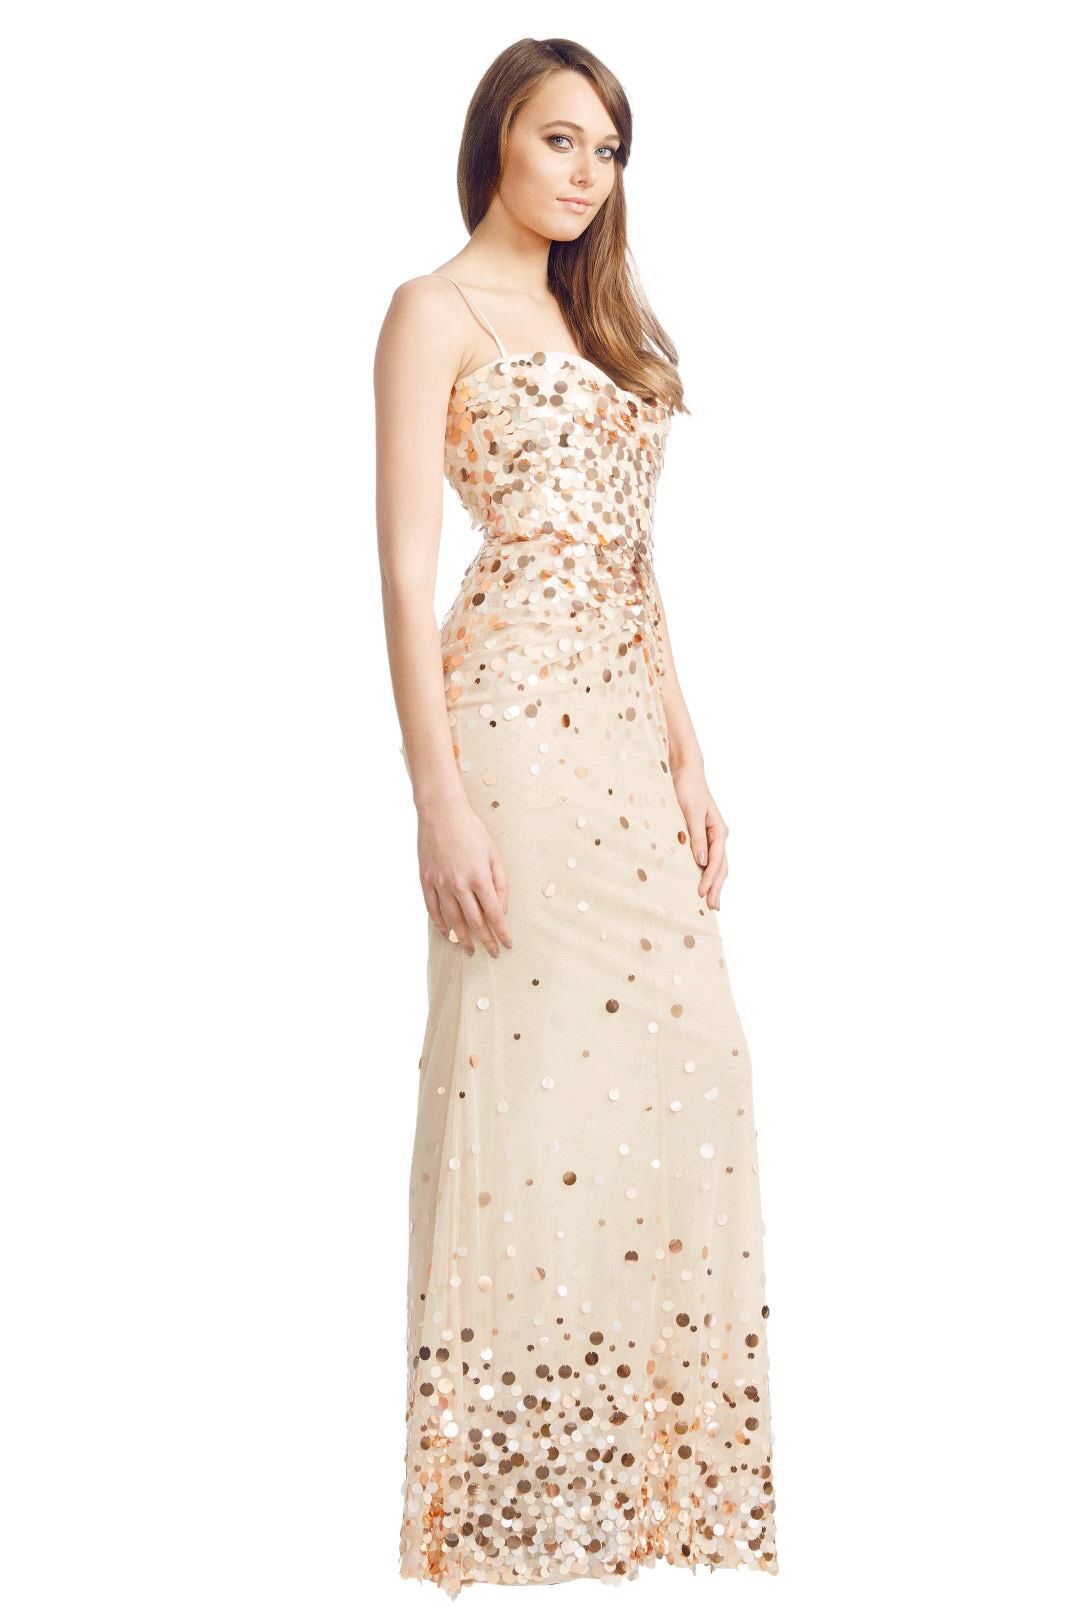 Alex Perry - Flurina Gown - Gold - Side